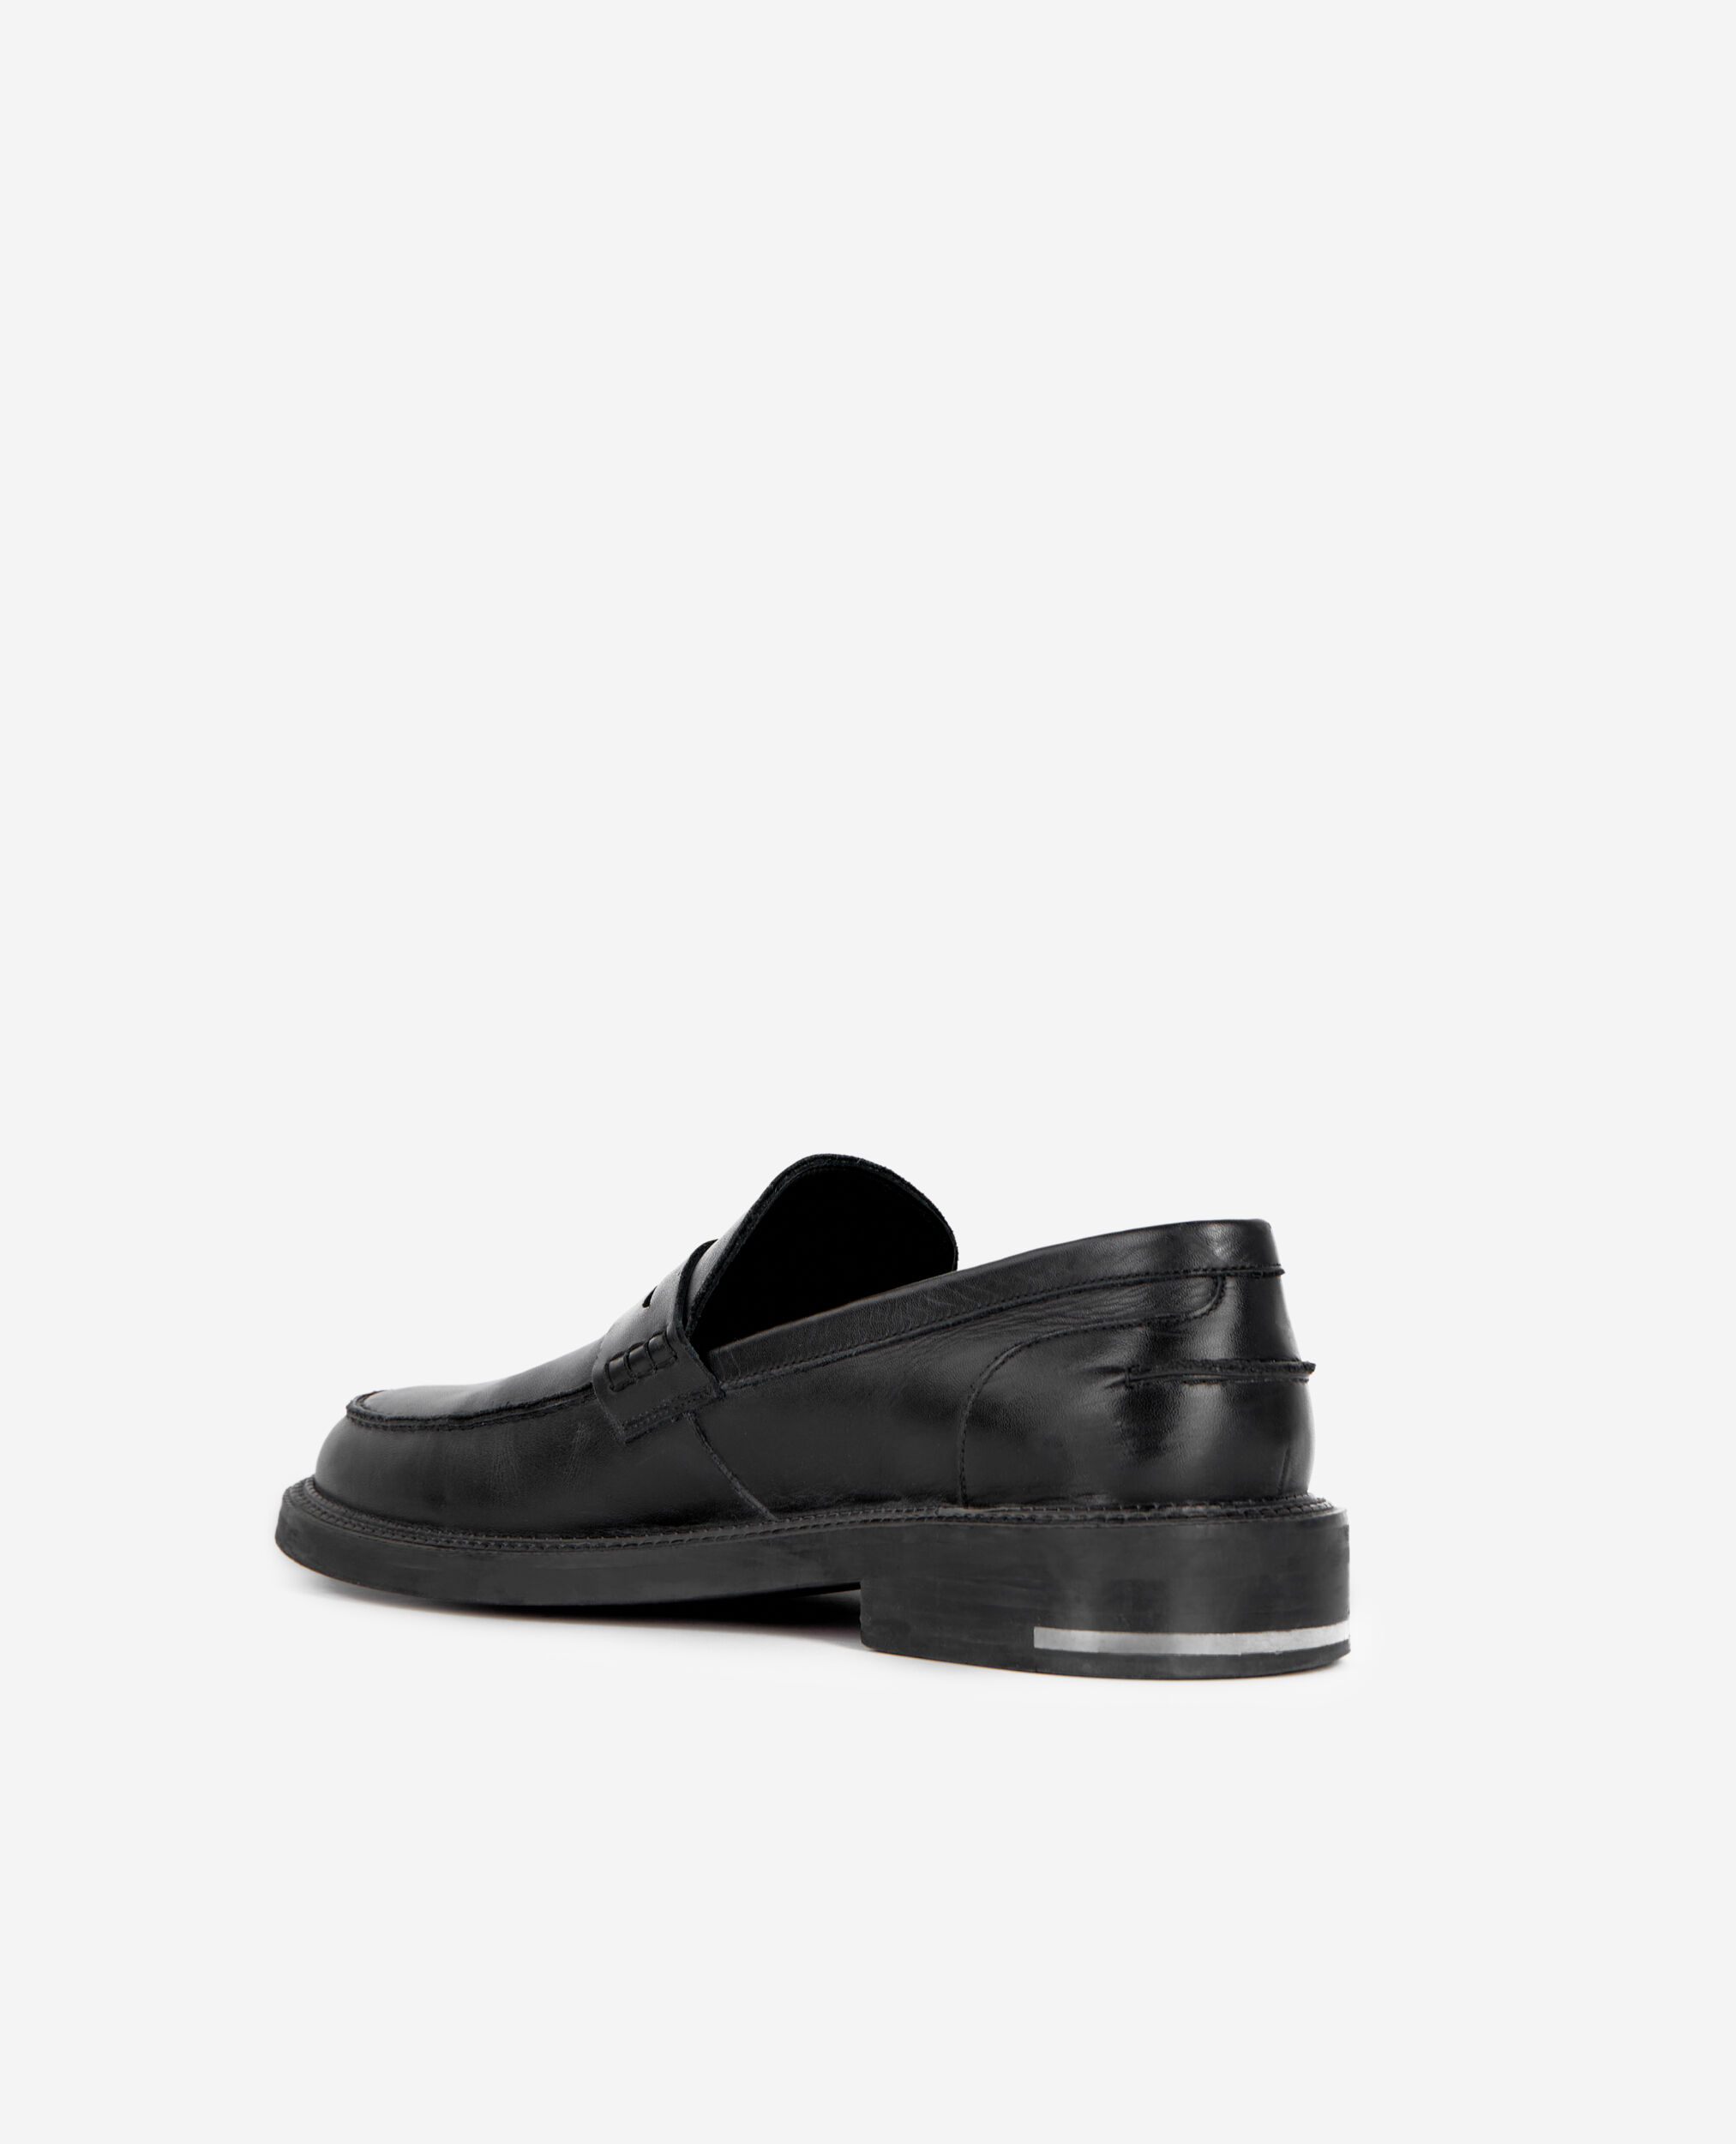 Penny loafers in black leather, BLACK, hi-res image number null